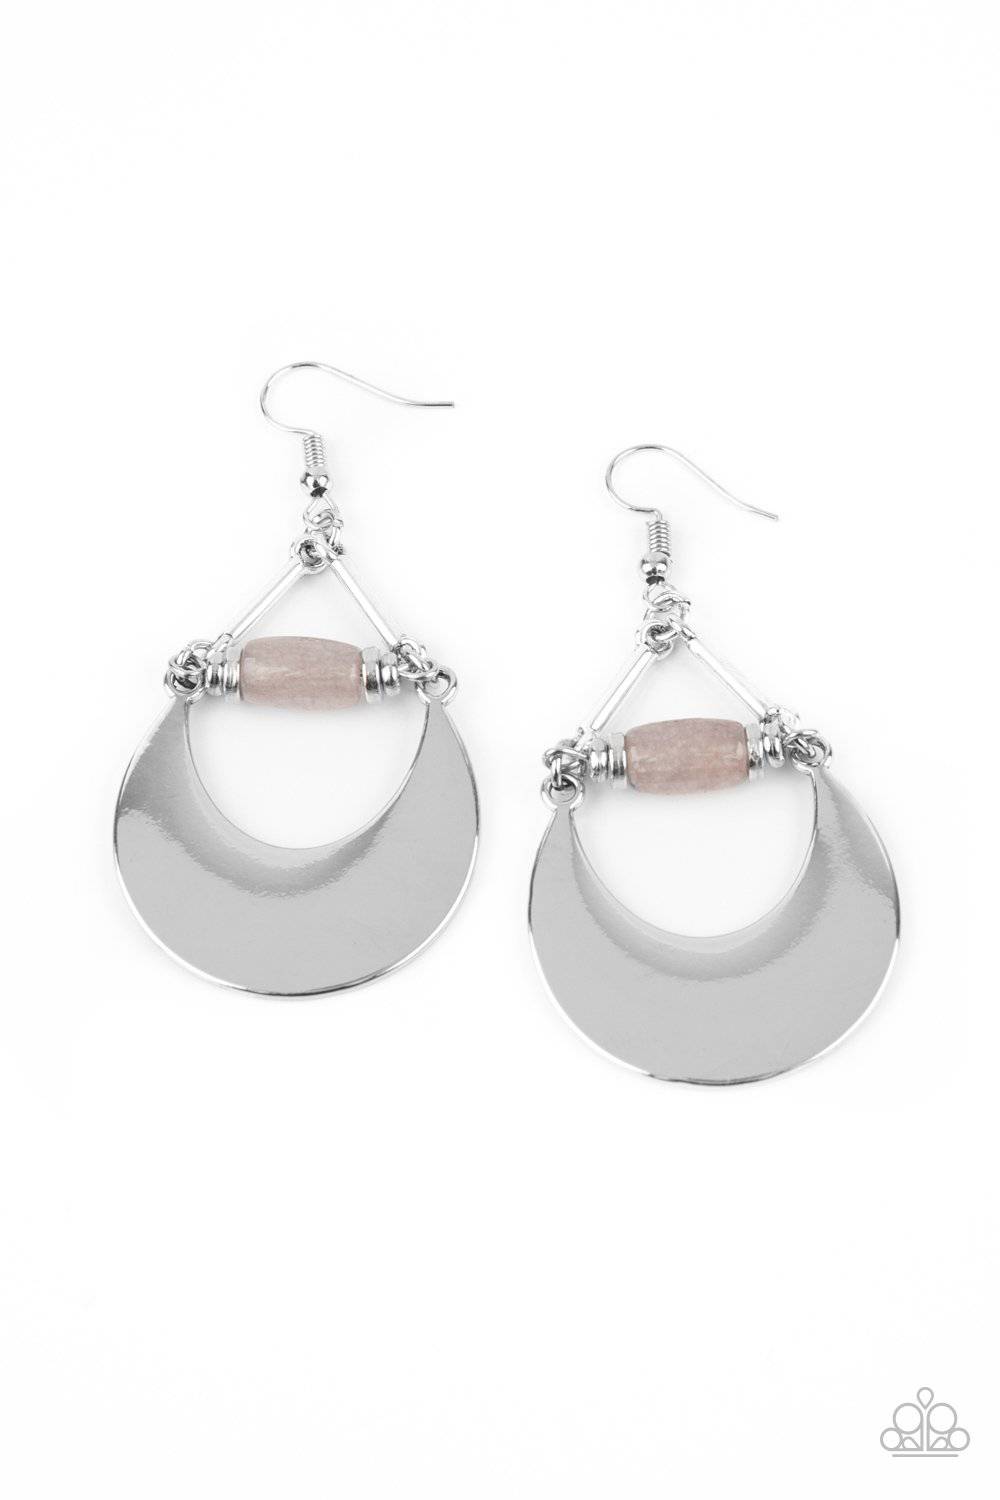 D372 - Mystical Moonbeams Silver Earring by Paparazzi Accessories on Fancy5Fashion.com